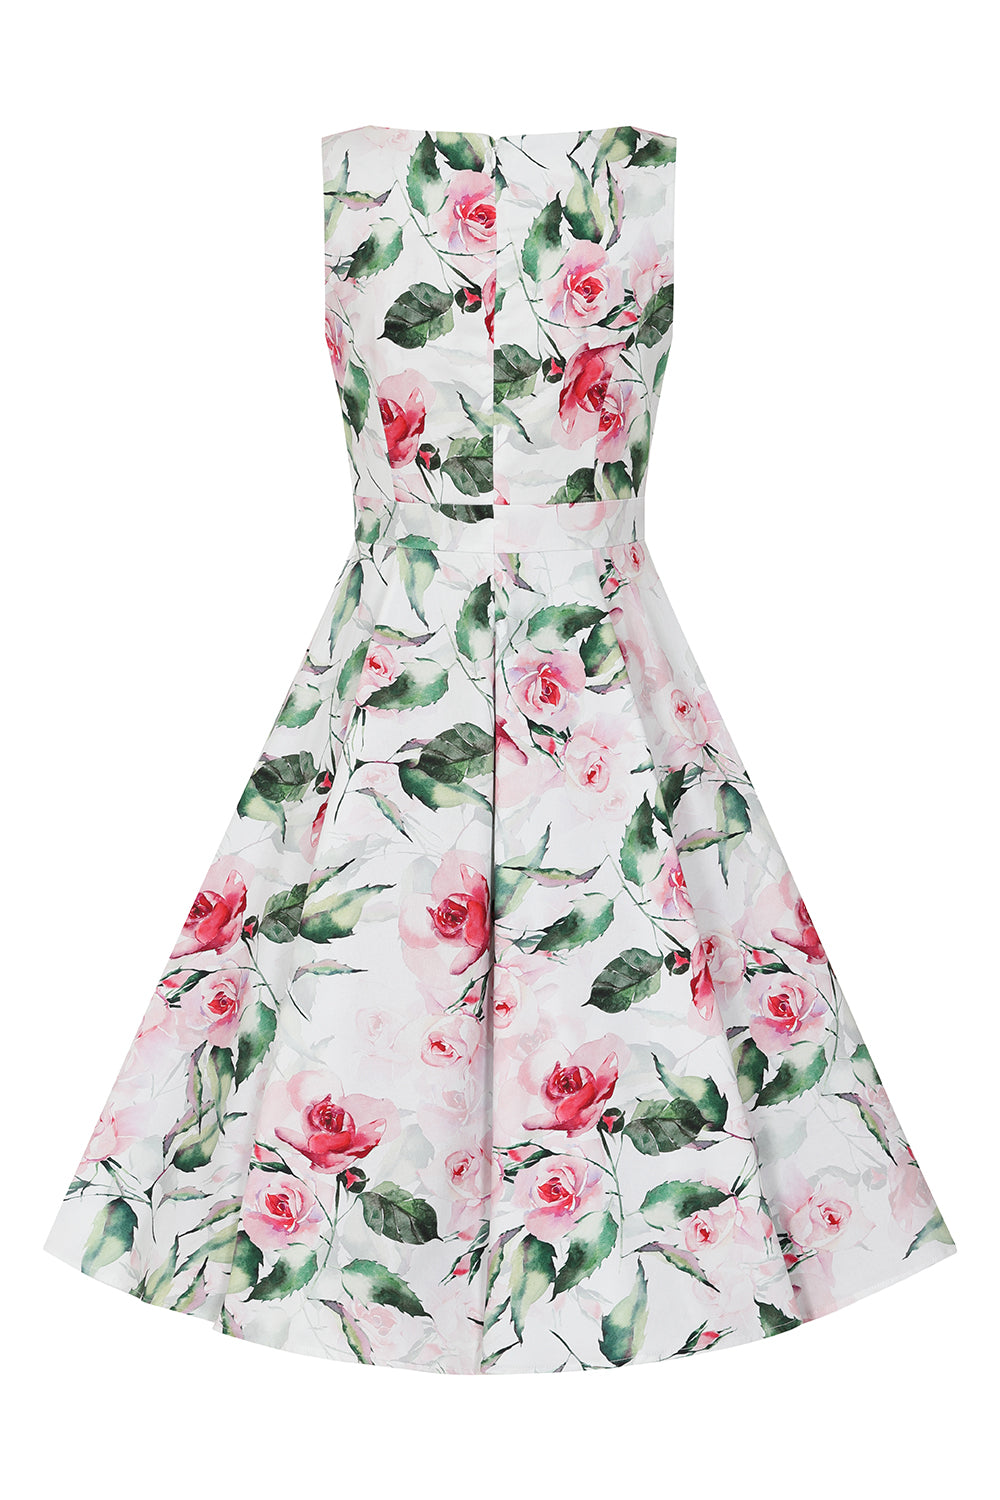 The back of the Summer Swing Dress by Hearts and Roses